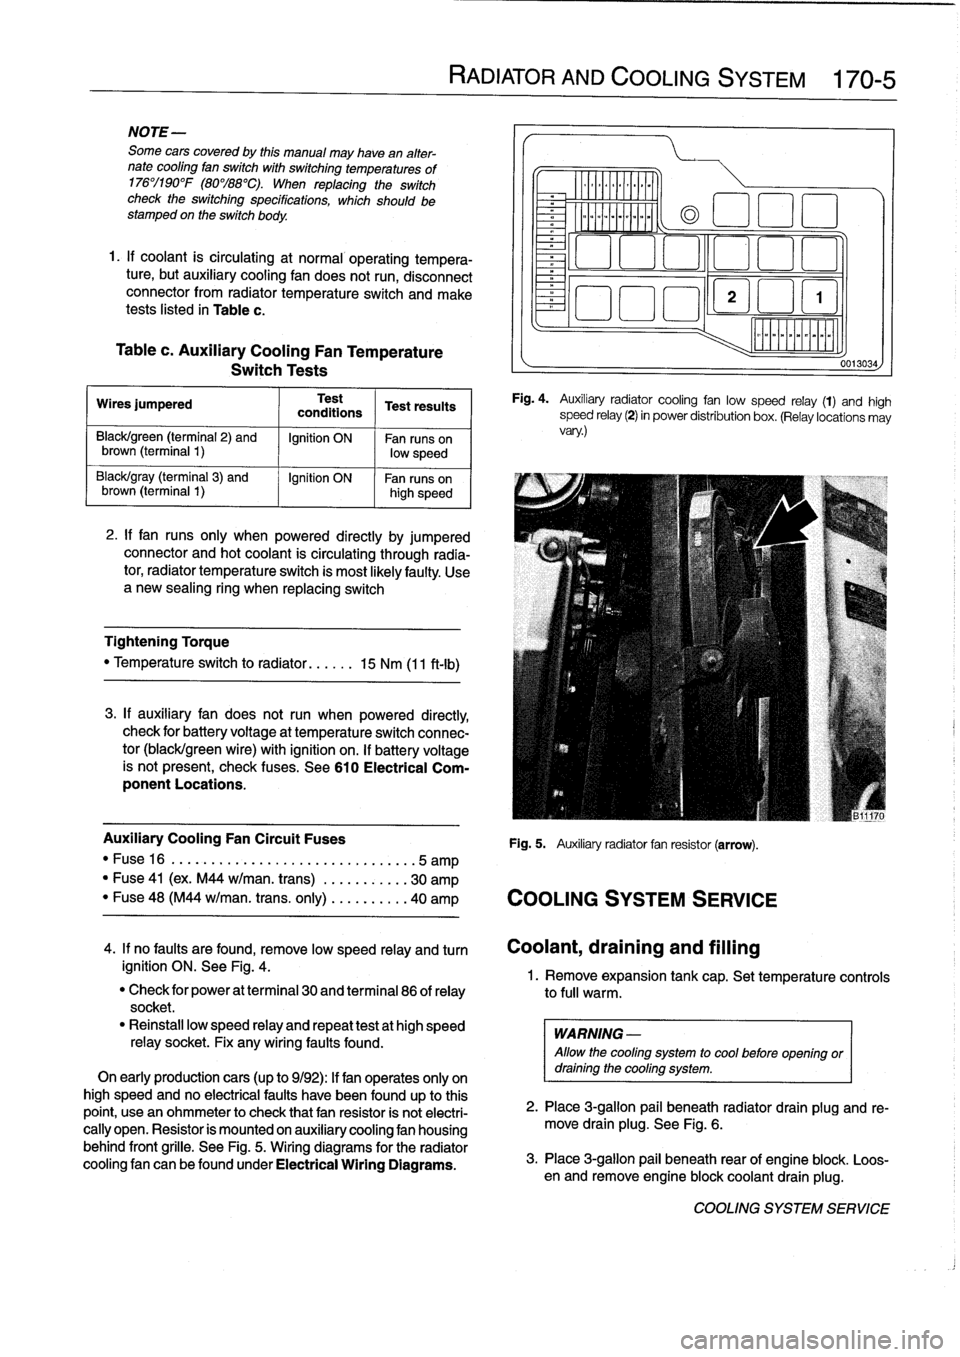 BMW M3 1993 E36 Workshop Manual 
NOTE-

Some
cars
covered
by
this
manual
may
have
an
alter-
nate
cooling
fan
switchwith
switching
temperatures
of
176%190W
(80%88°C)
.
When
replacing
the
switch
check
theswitching
specifications,
whi